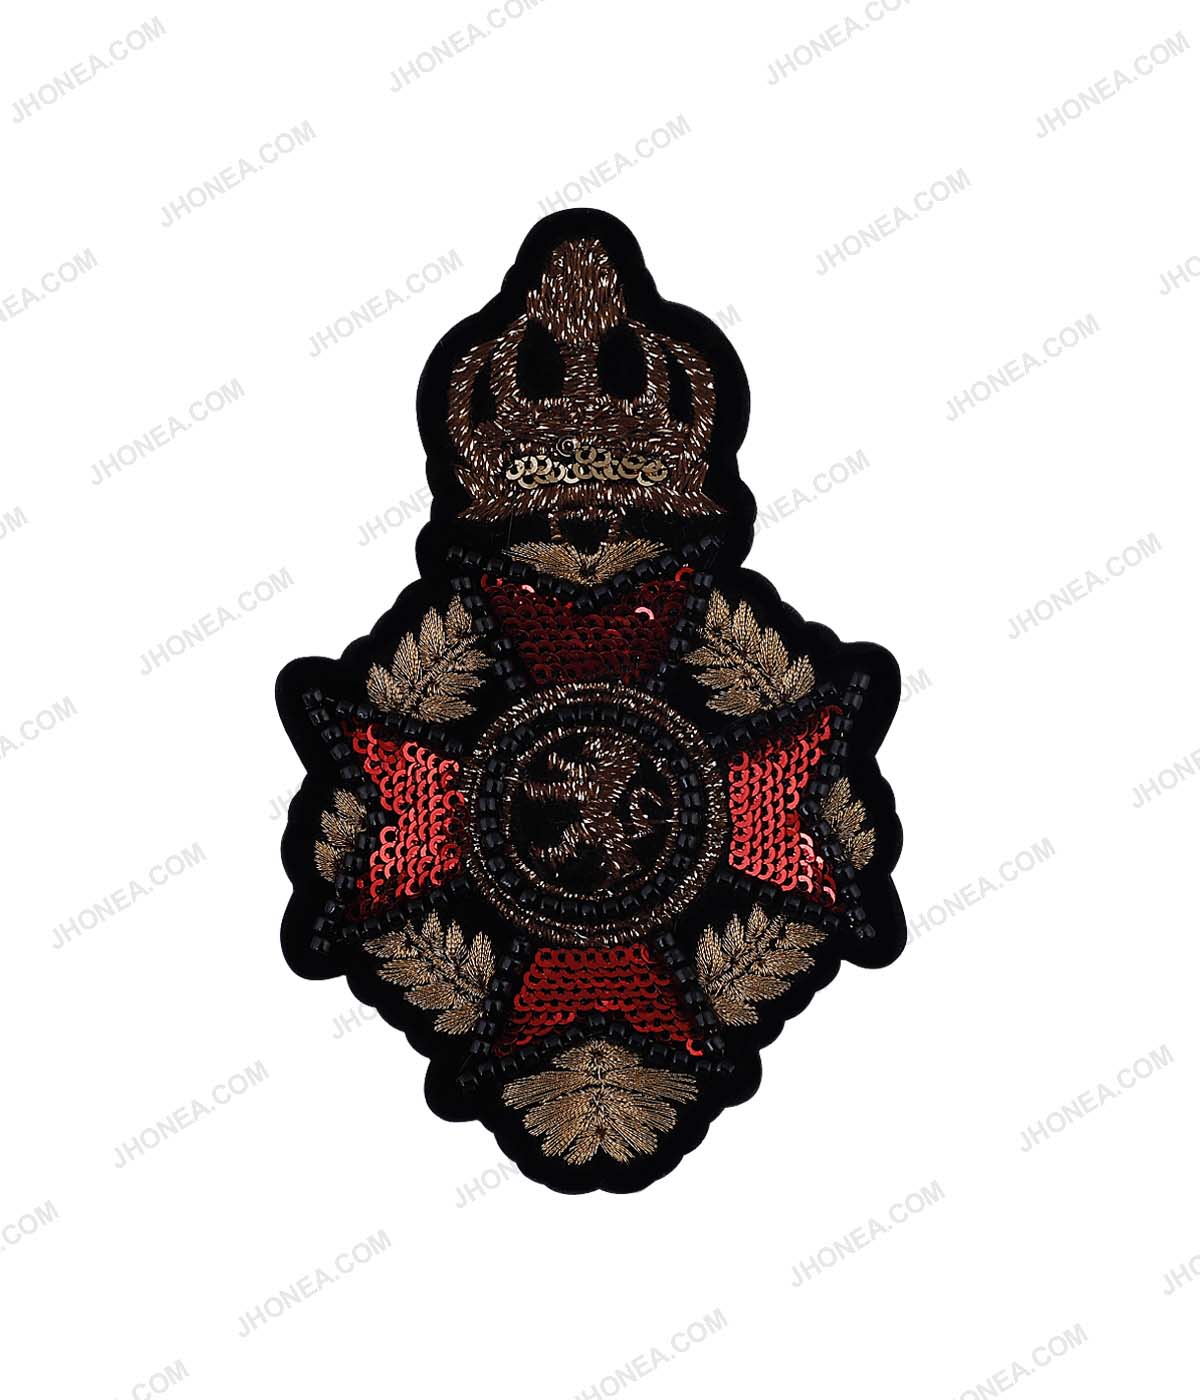 Royal Empire Leopold Patch for Men's Clothing